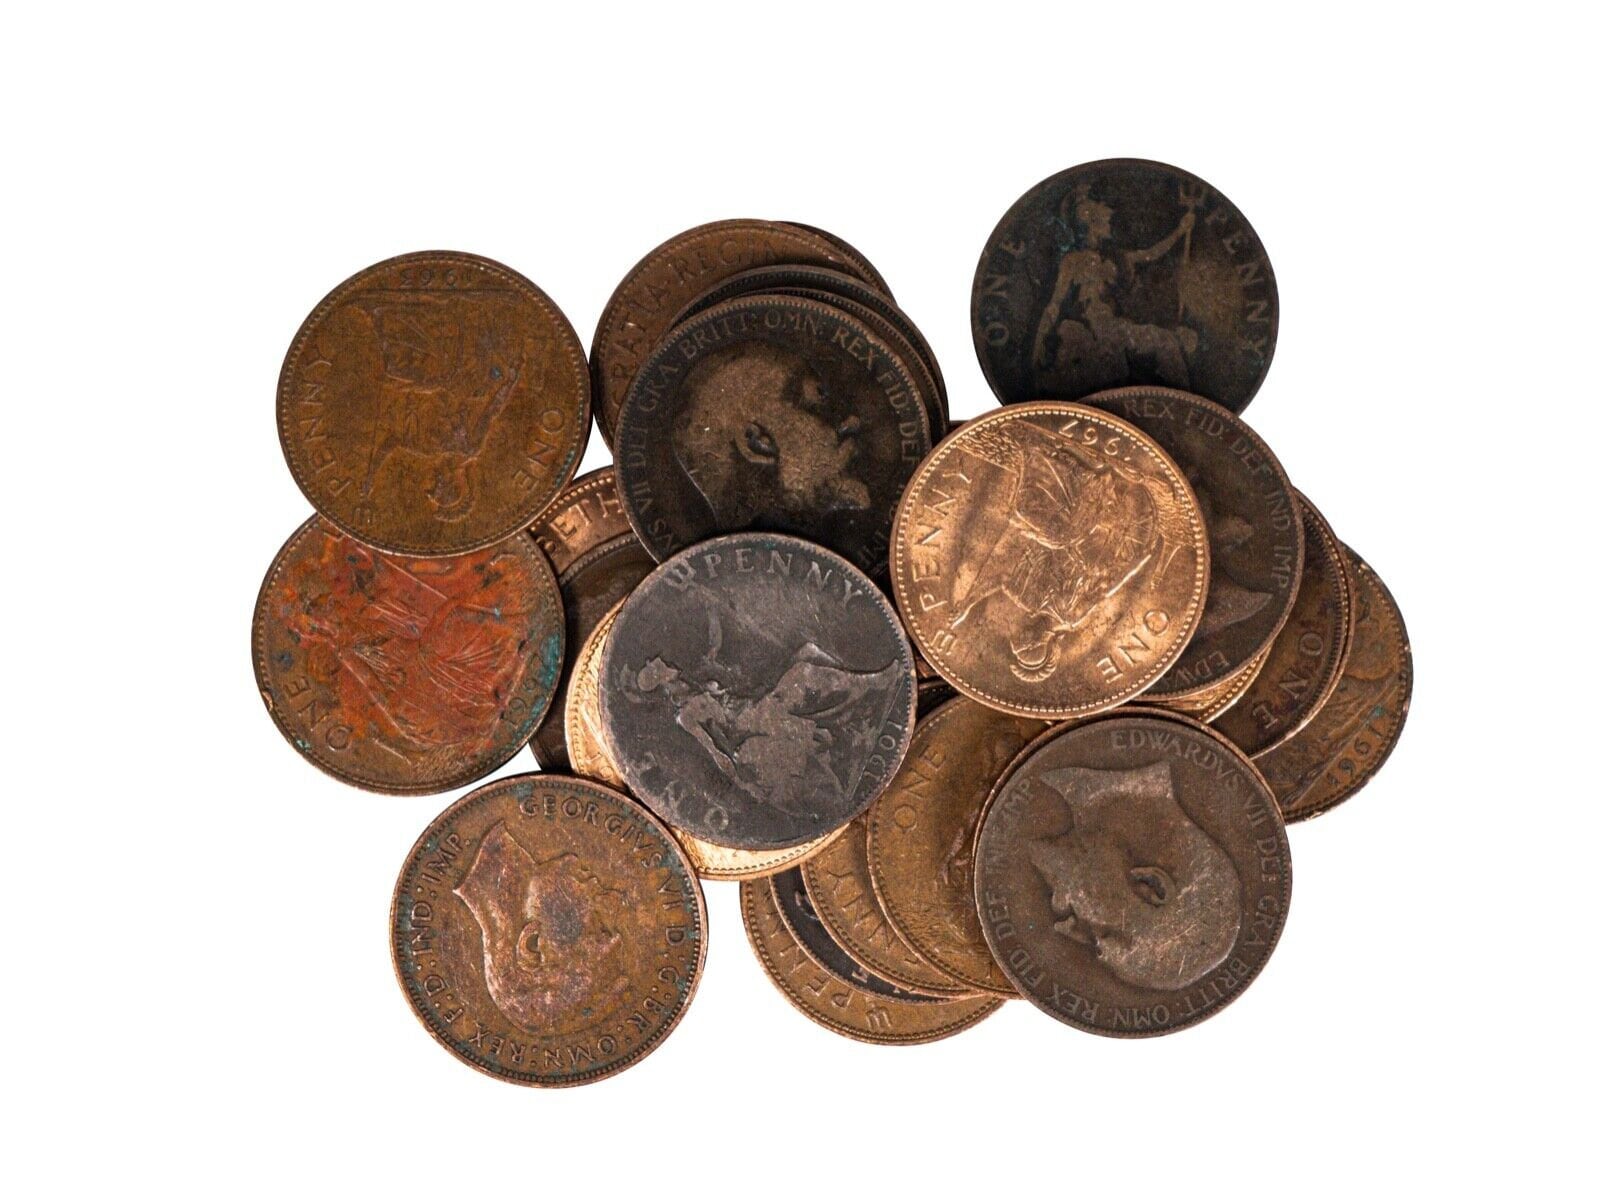 Bulk Lot of 100 Mixed Coins From the United States. 1 Cent Coin Made From  Copper. USA One Penny abraham Lincoln 